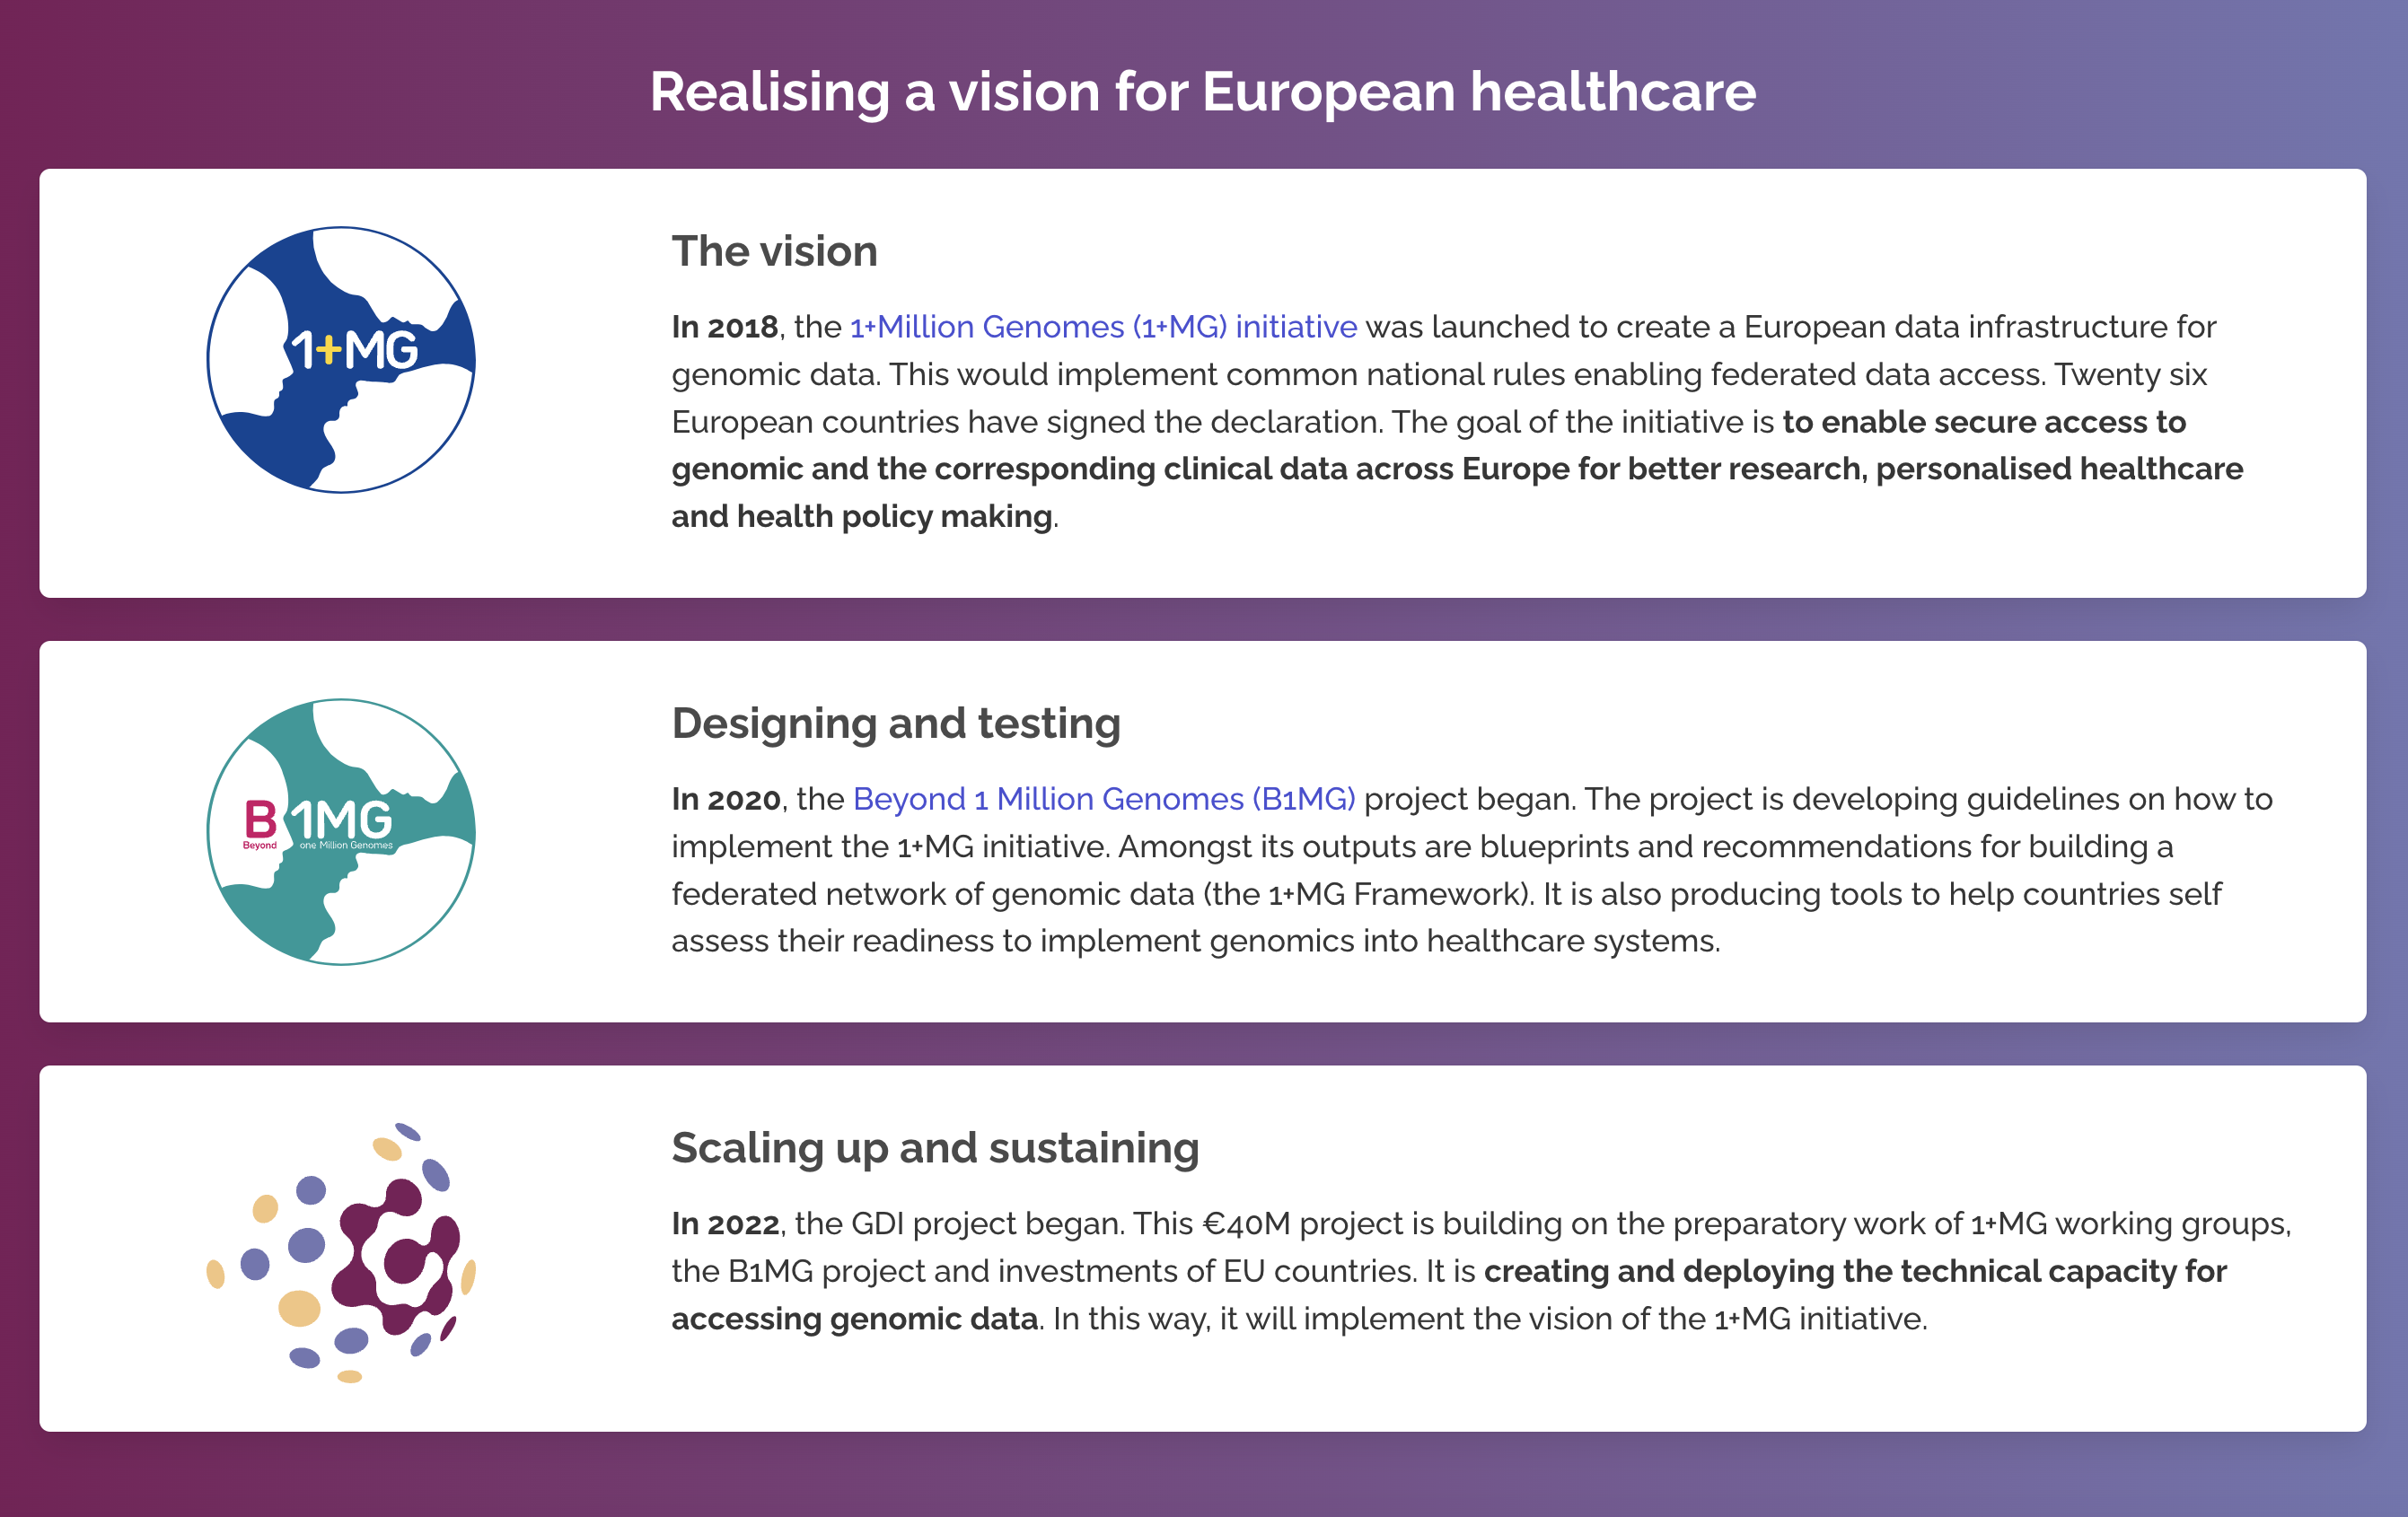 Realising vision for European Healthcare